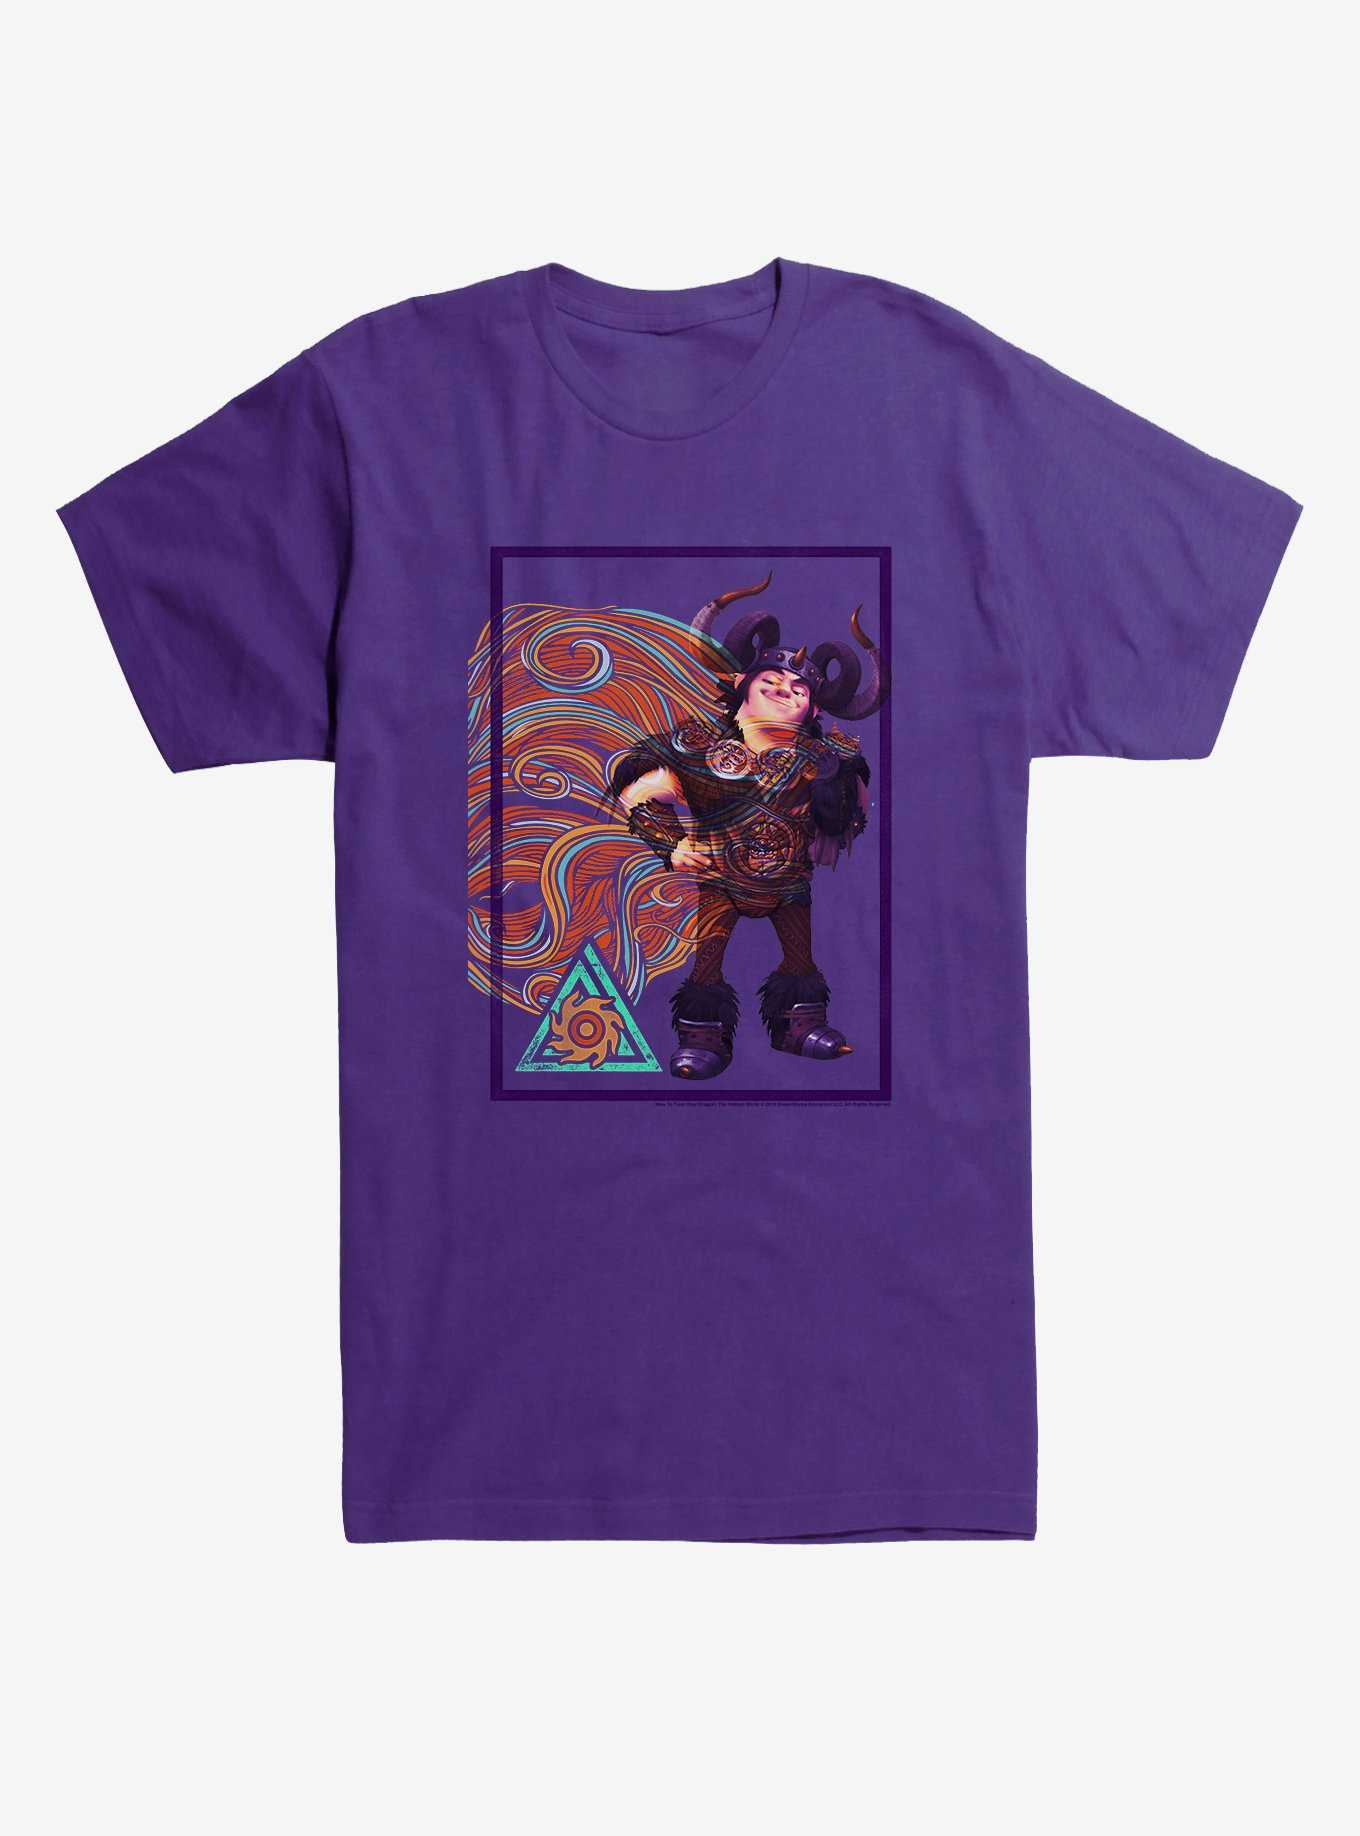 How To Train Your Dragon Snotlout Swirl T-Shirt, , hi-res